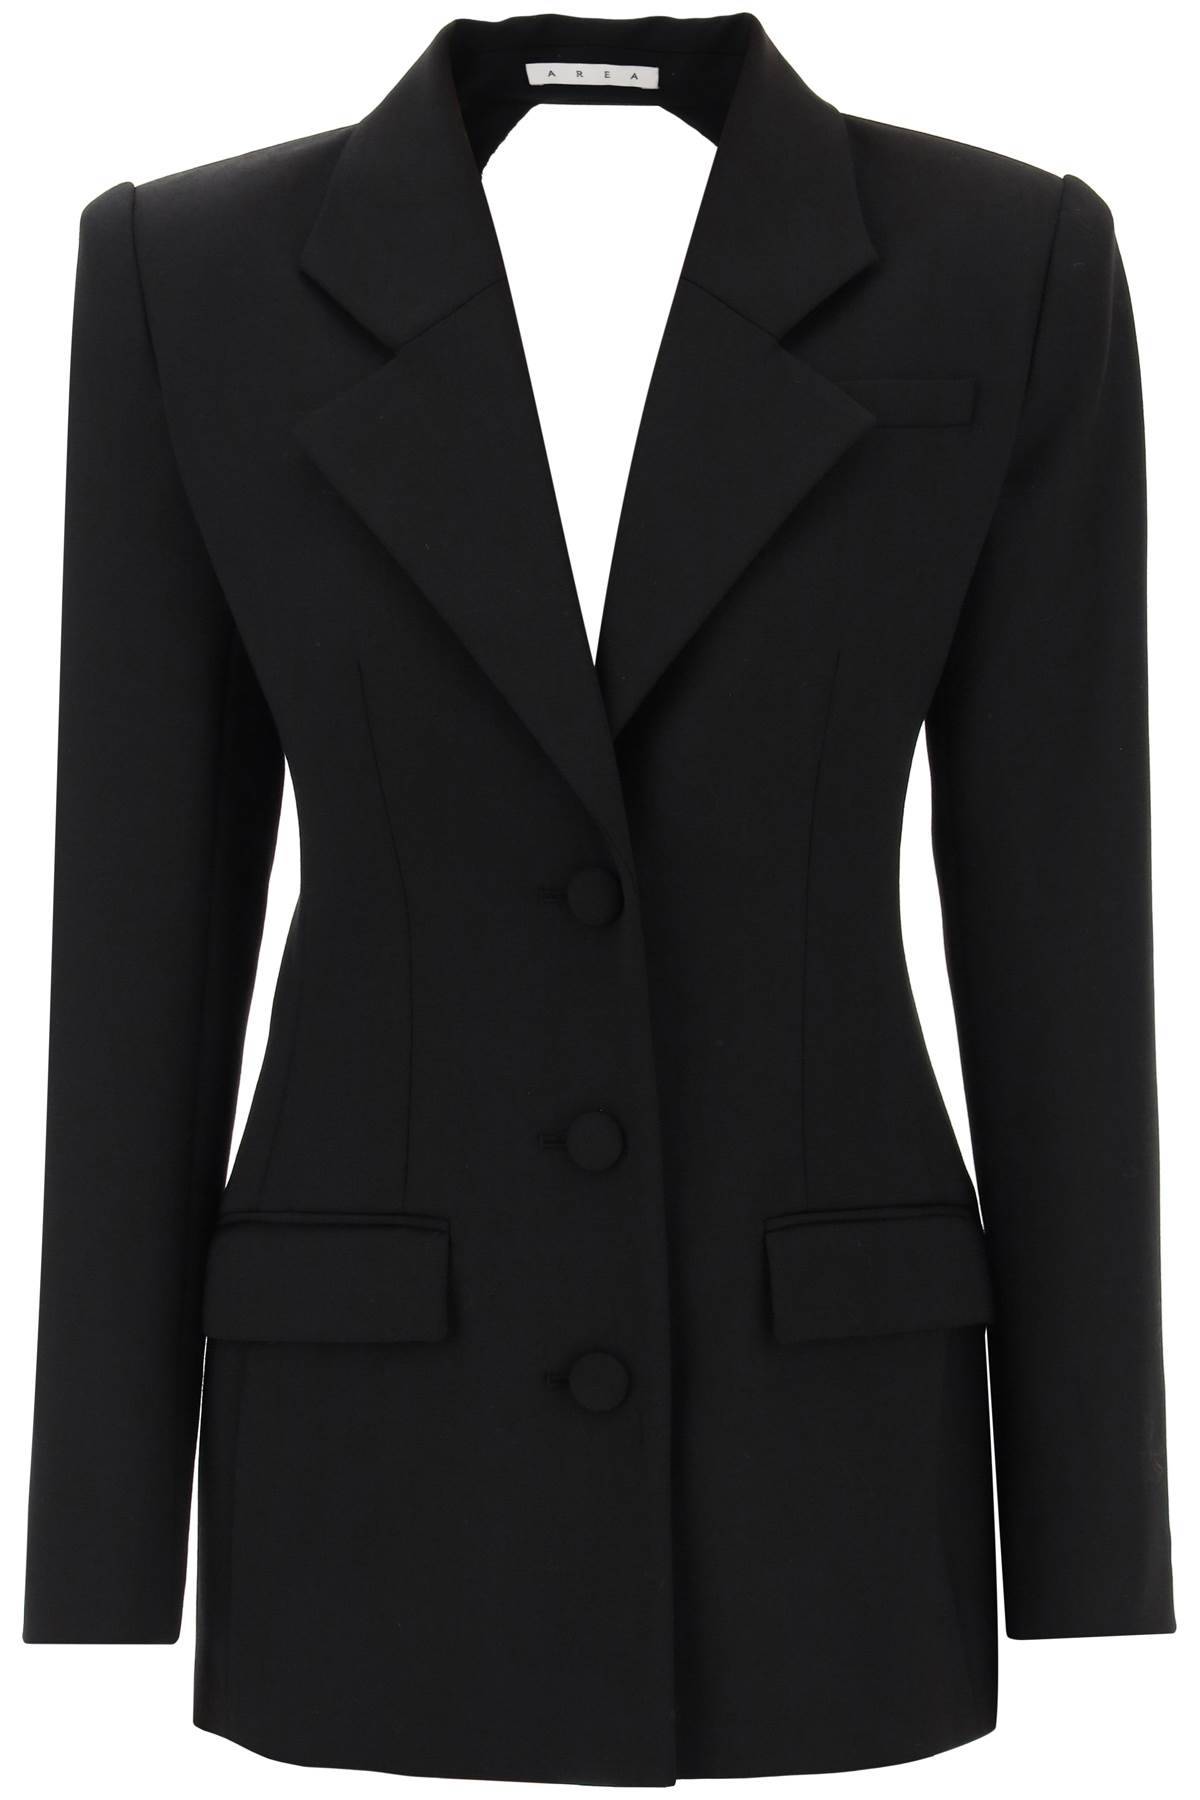 AREA blazer dress with cut-out and crystals